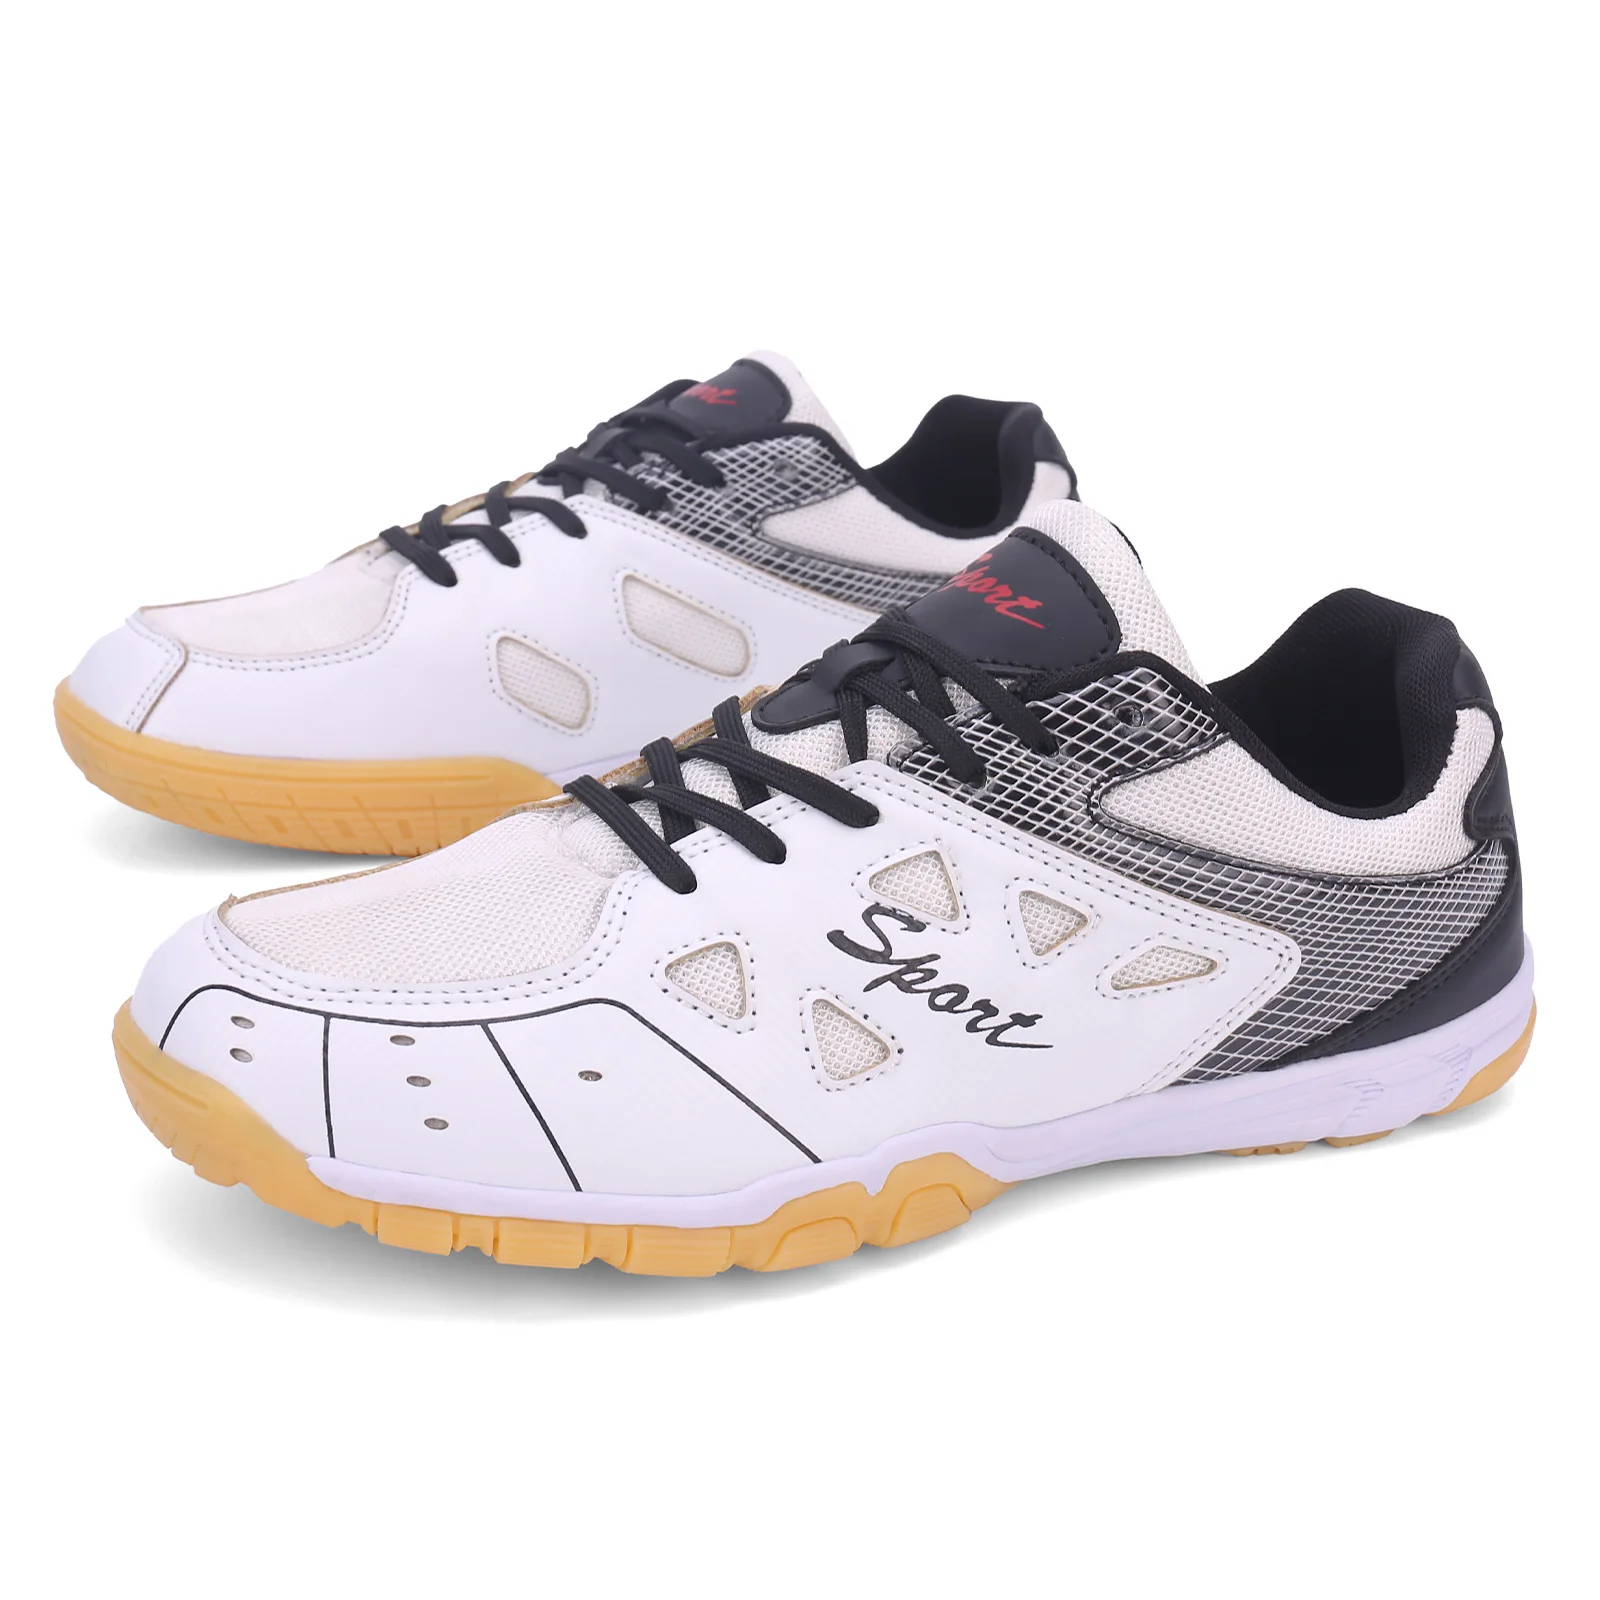 

Professional men's and women's badminton shoes competition outdoor tennis training sports shoes table tennis shoes 36-45 yards